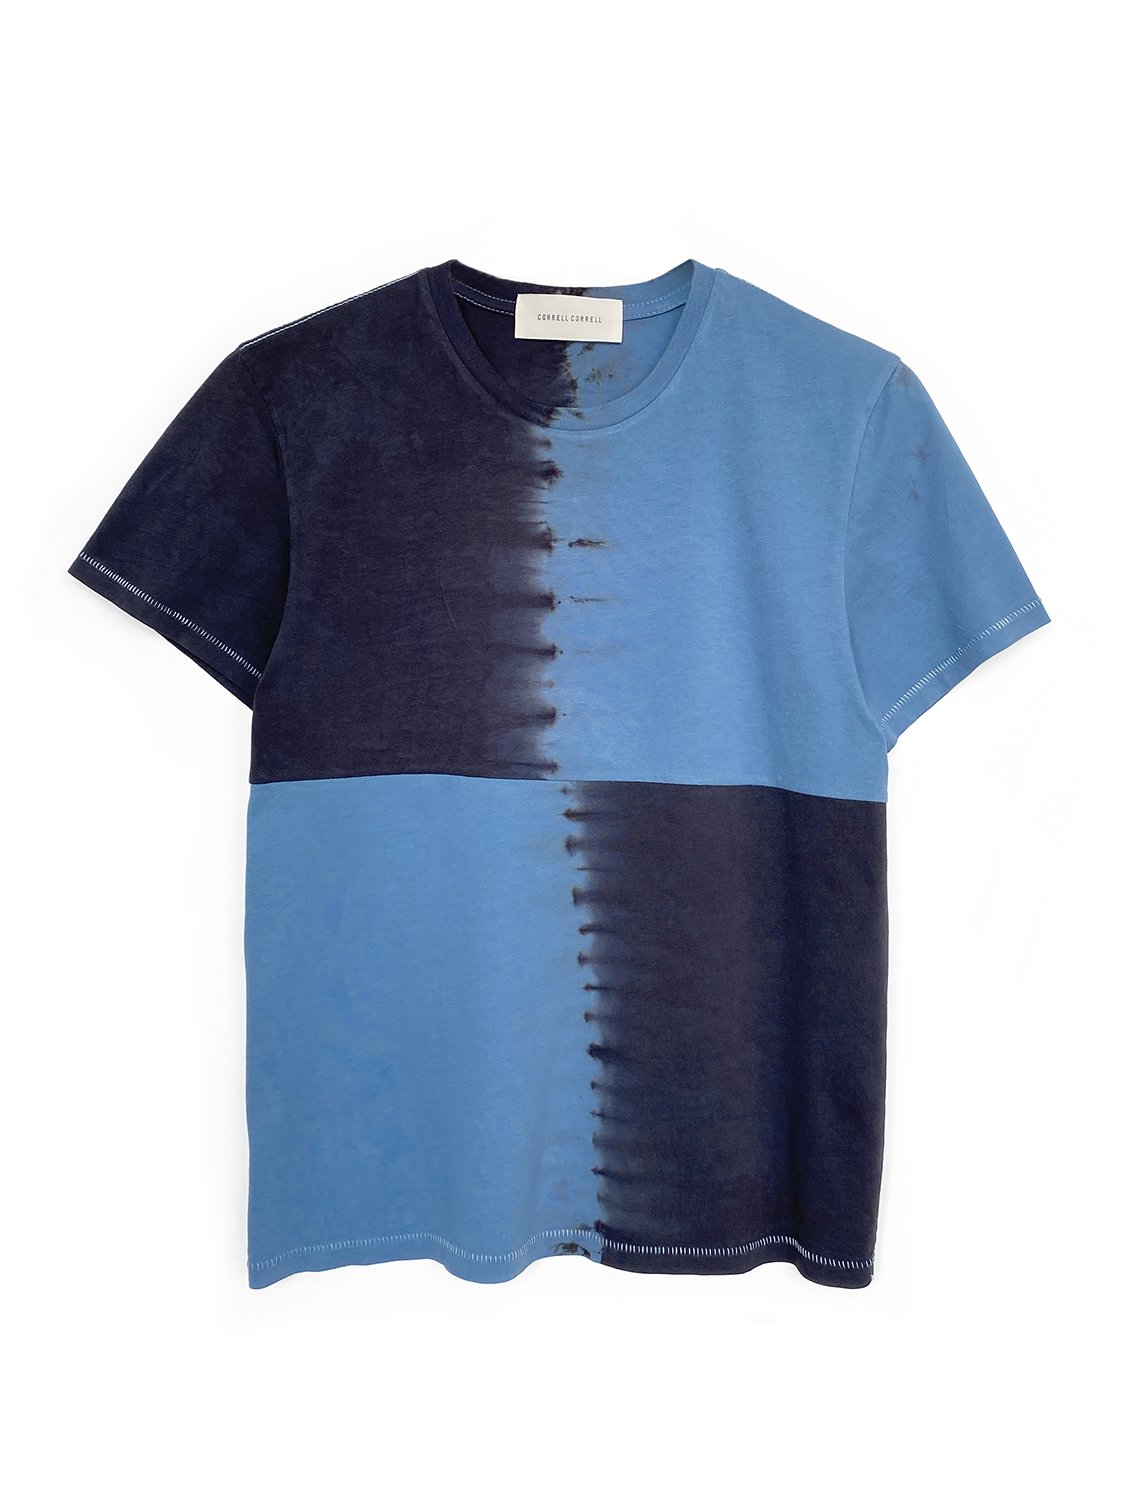 Circle T-Shirts and other Unisex Geometric Shirts — Correll Correll